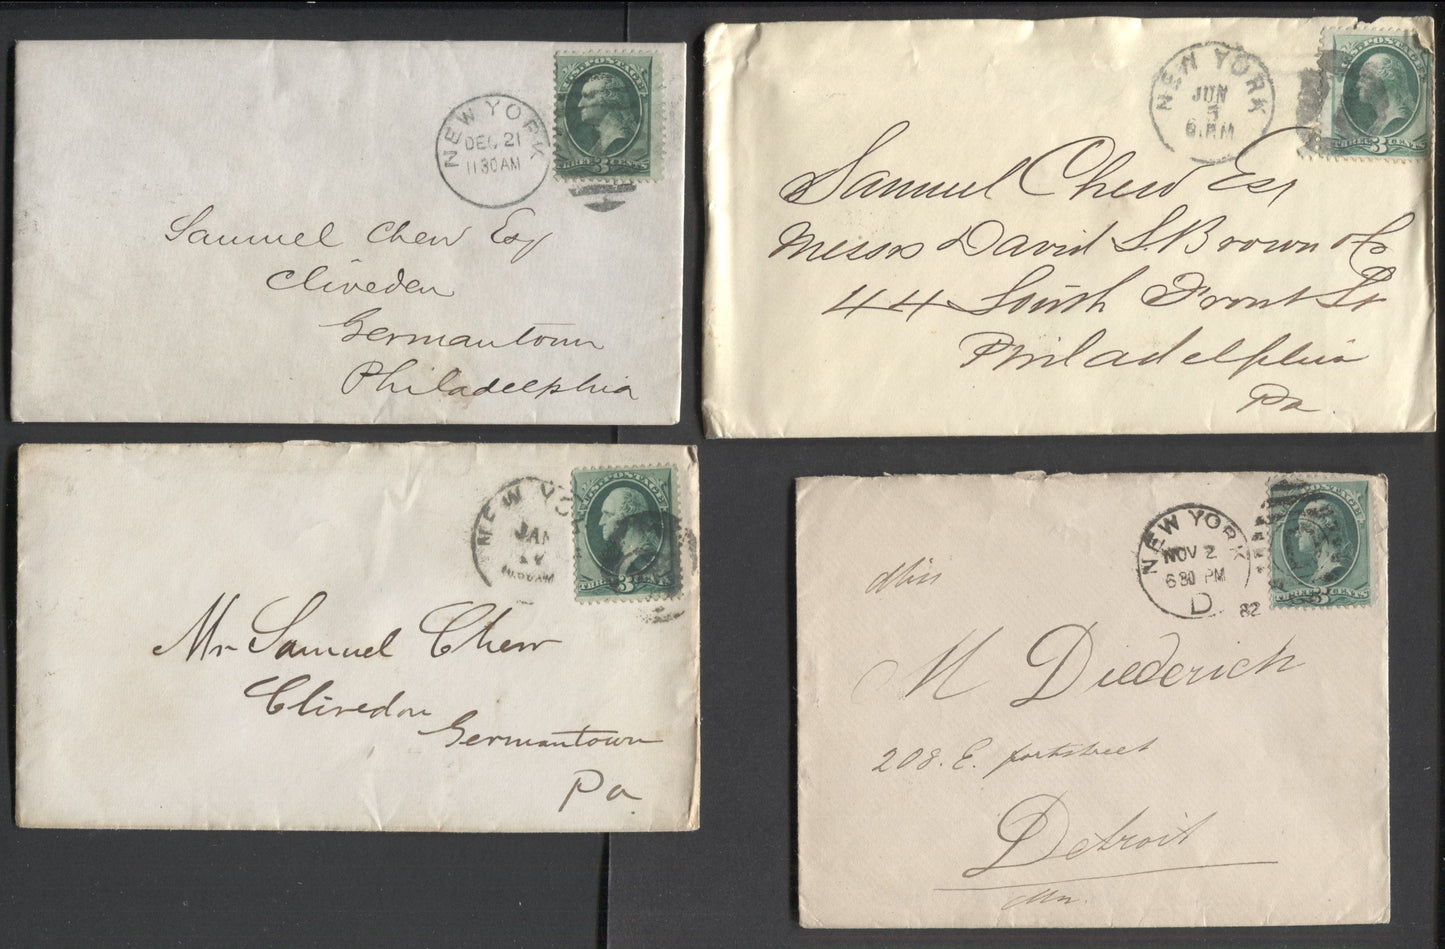 Lot 7 United States  #136, 158, 207 3c Green Washington, 1870-71 Grilled Banknote, 1873-1881 Continental Banknote and 1881-1882 ABN Banknote Issue Covers, Net Est. $20